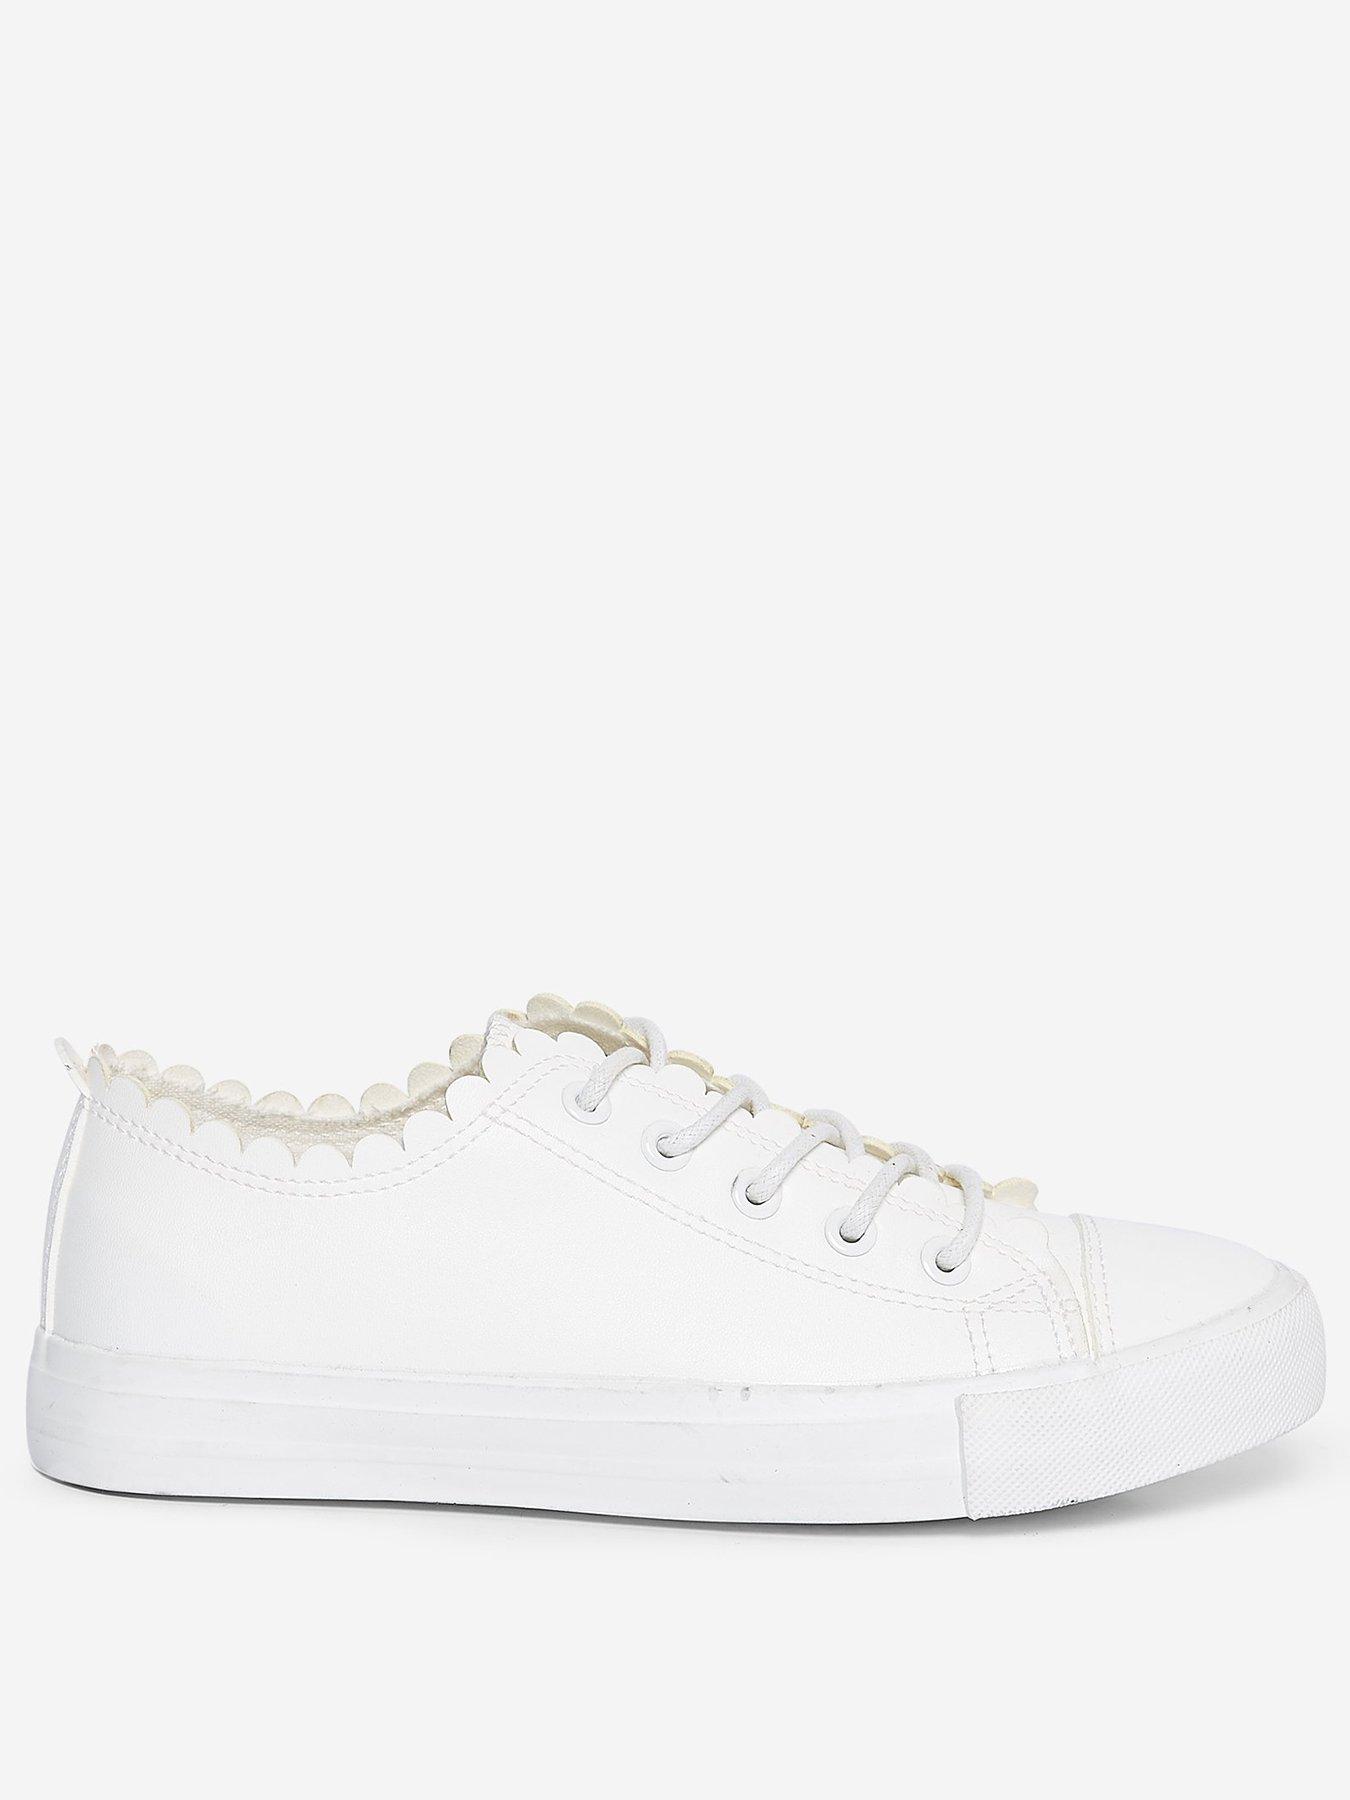 Dorothy Perkins White Isabella Trainers - Ivory | littlewoodsireland.ie